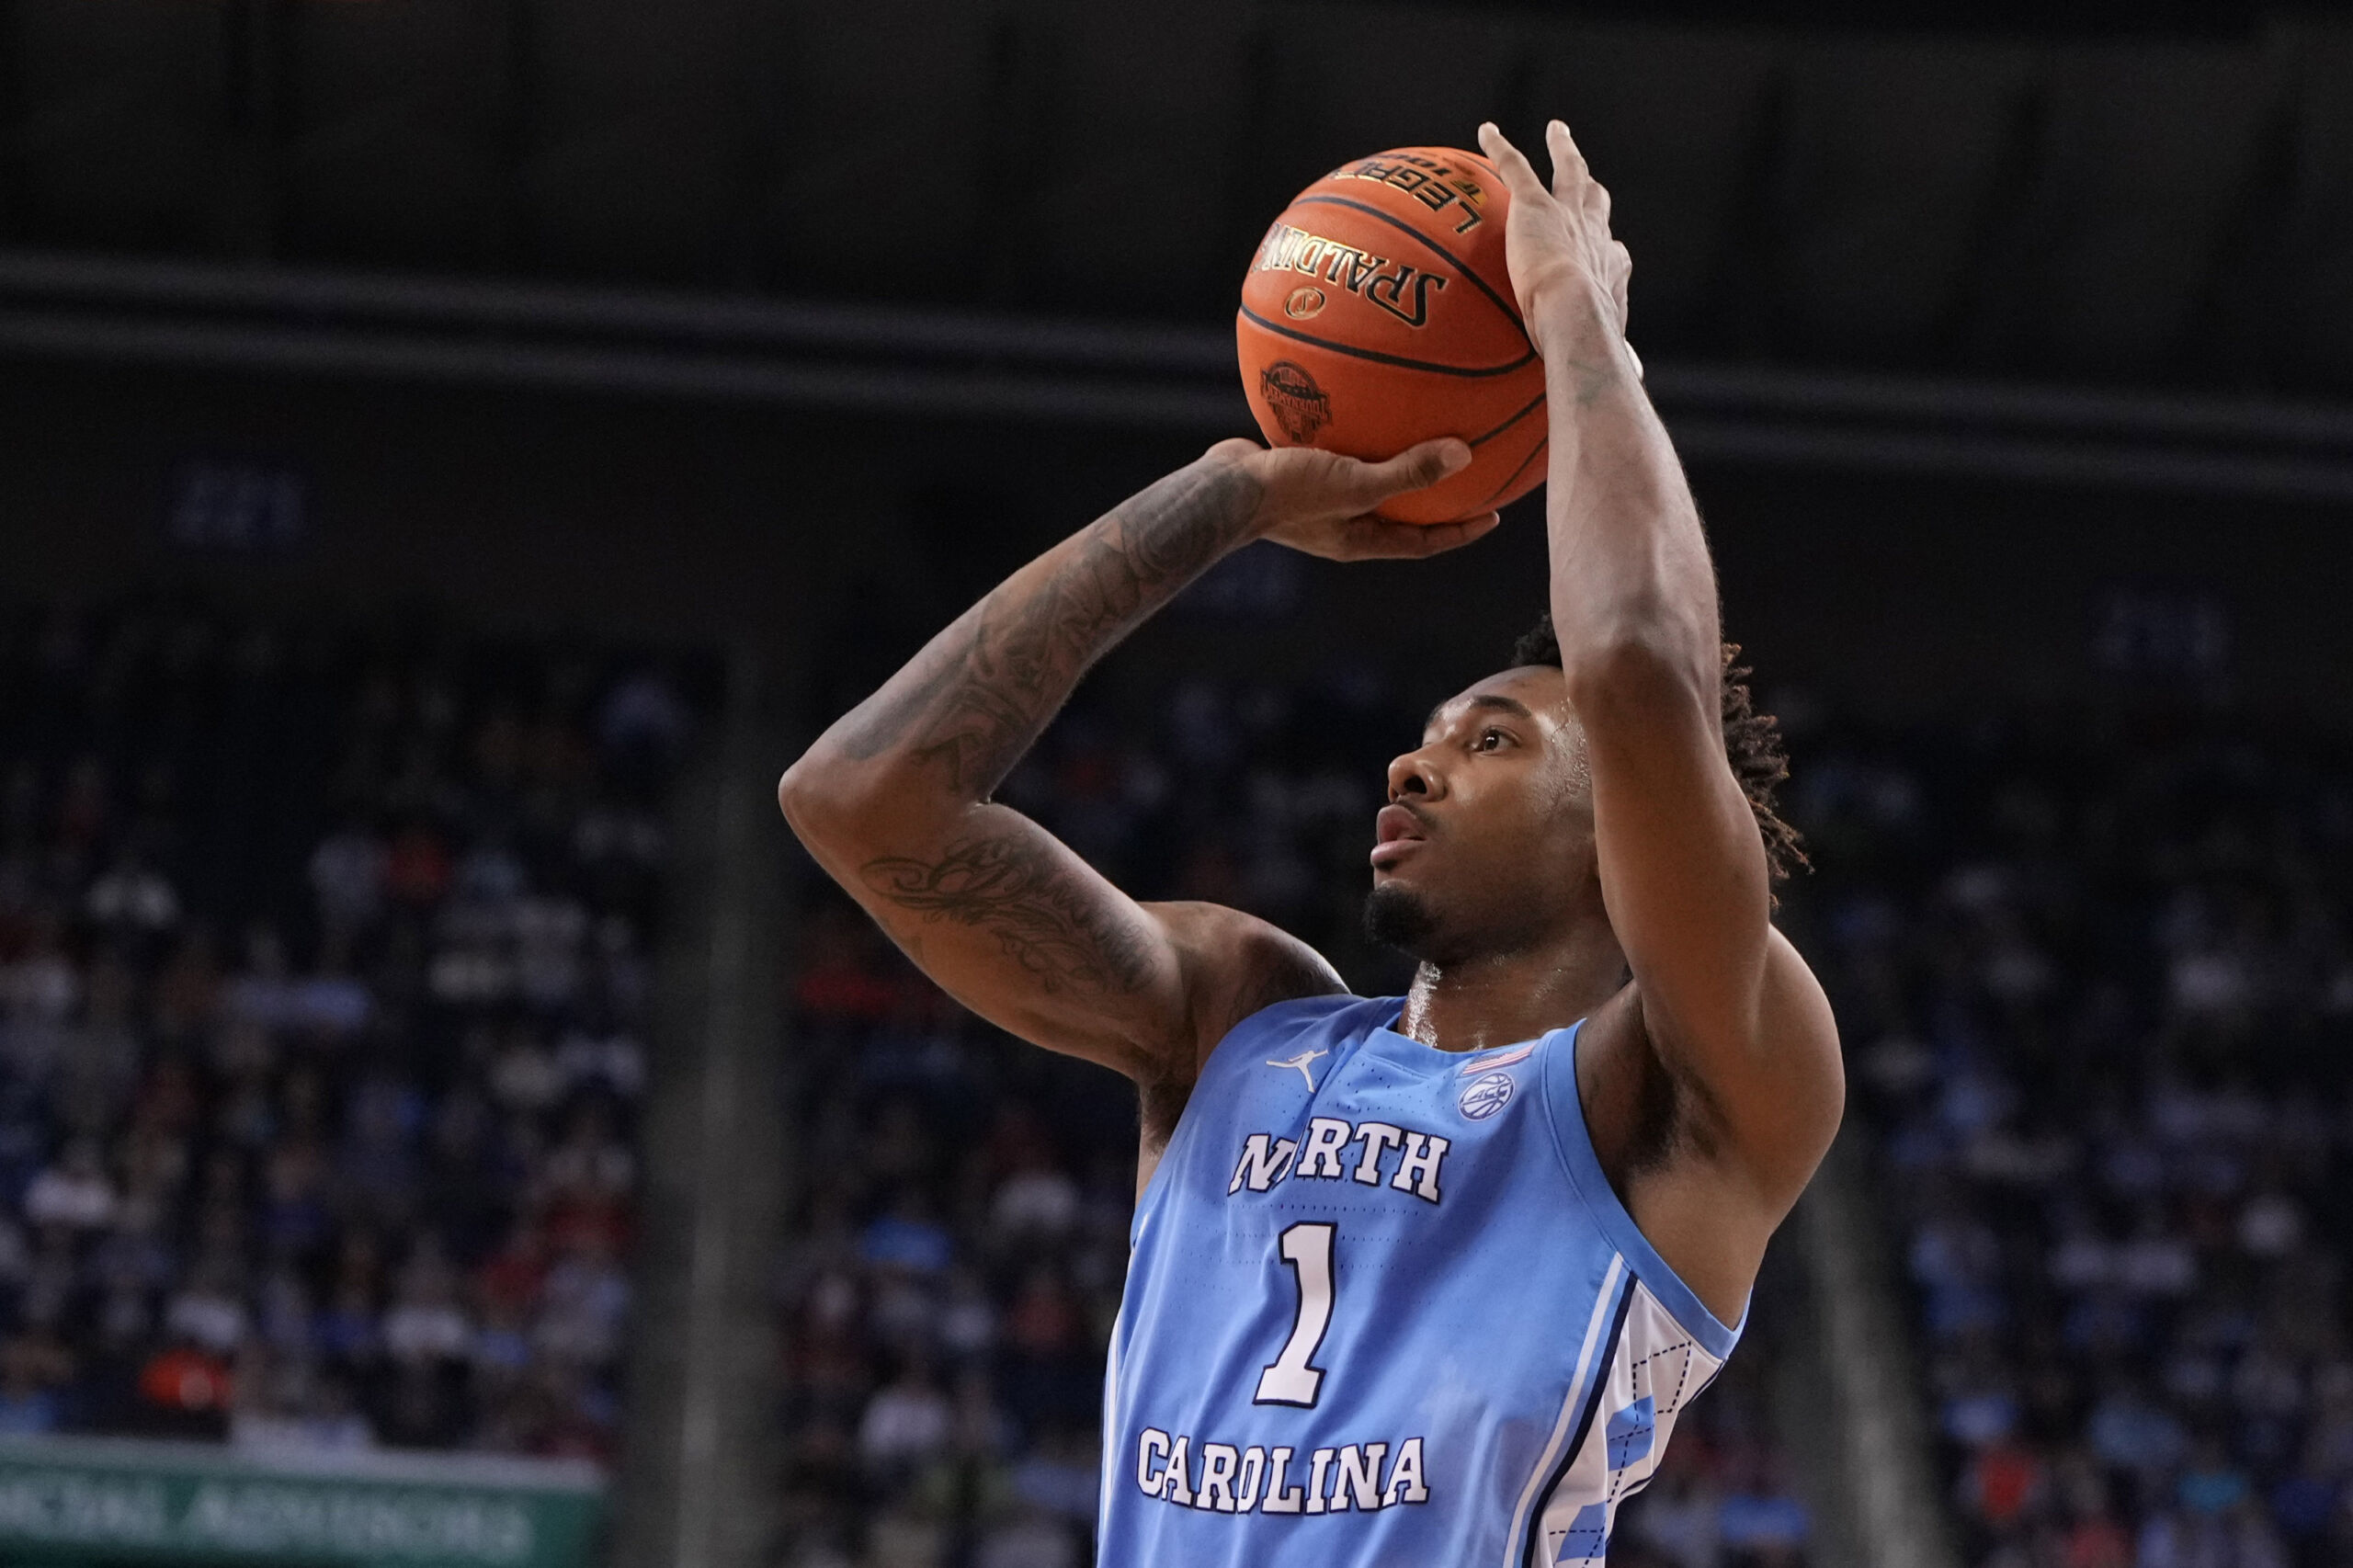 UNC Basketball: FIRST LOOK at Leaky Black in a Hornets uniform